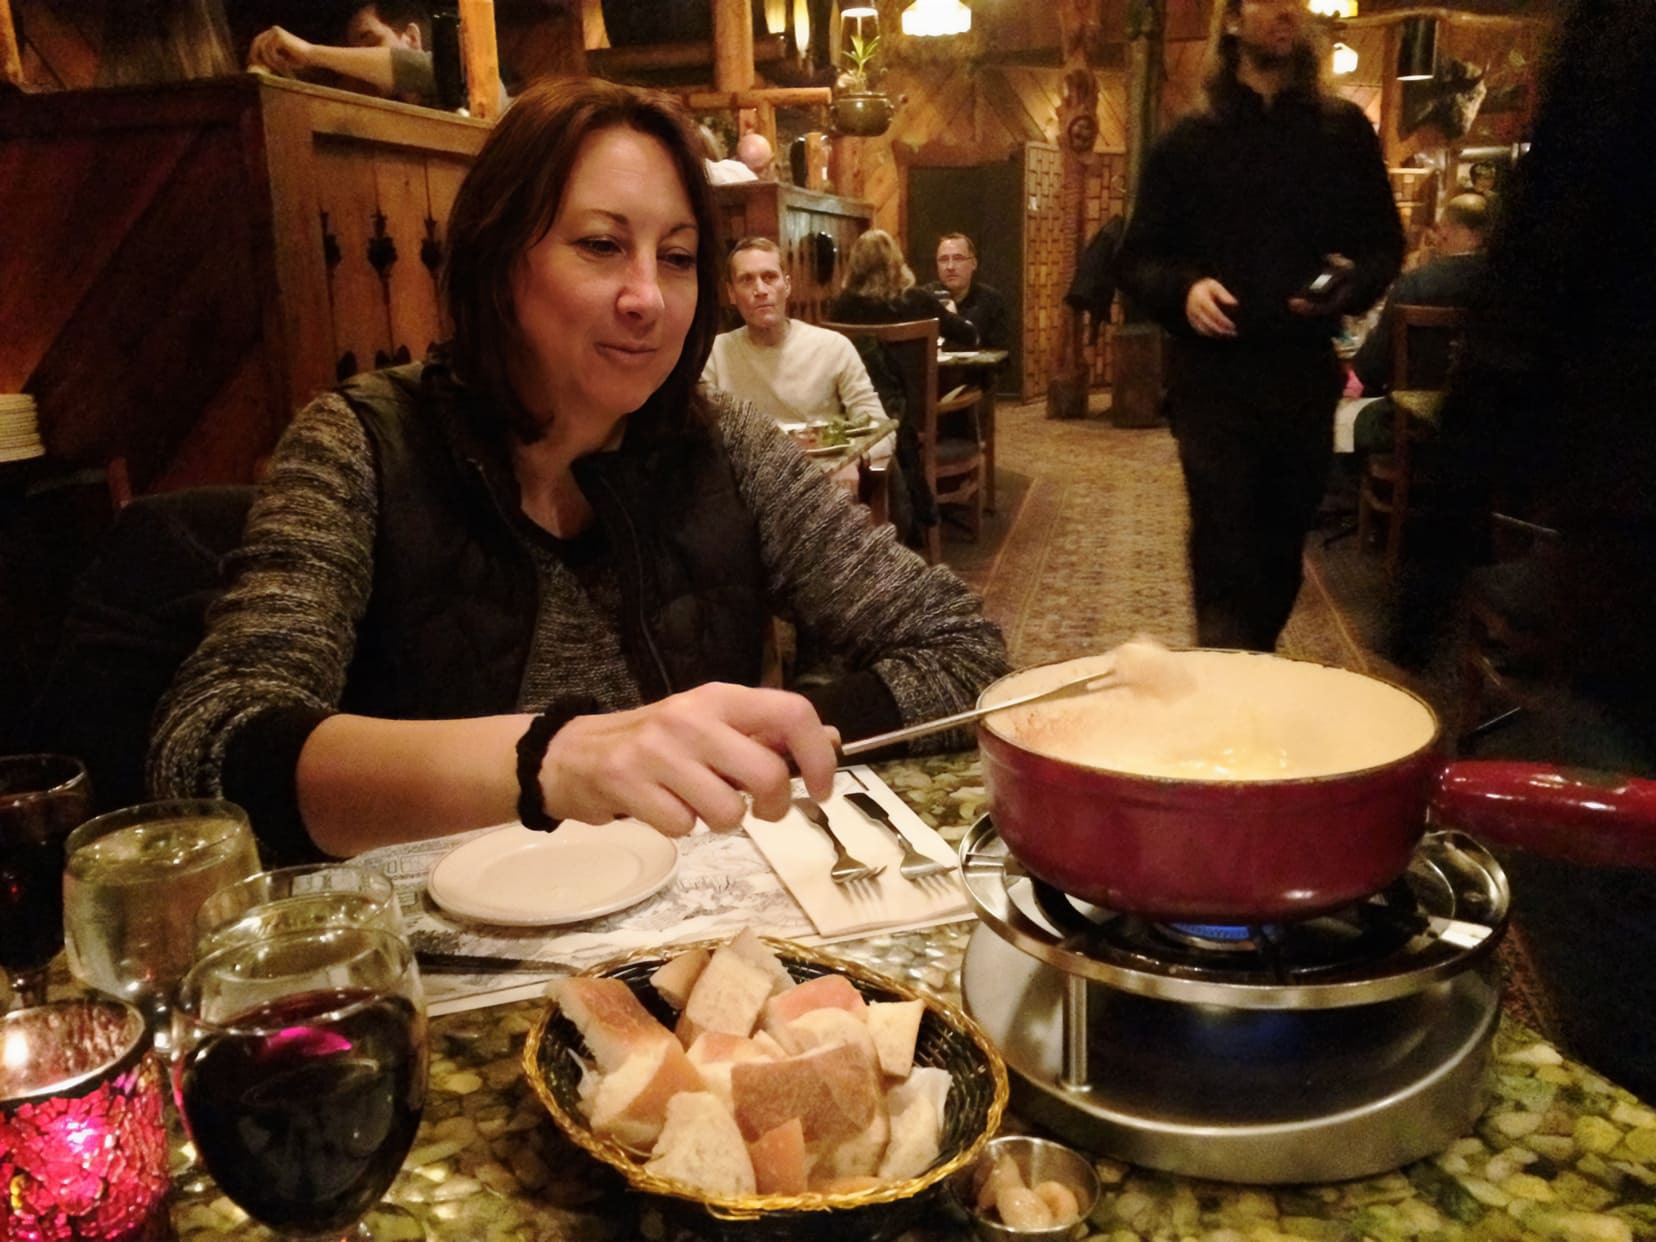 Shelley dipping bread into a cheese fondue at the Grizzly house in Banff